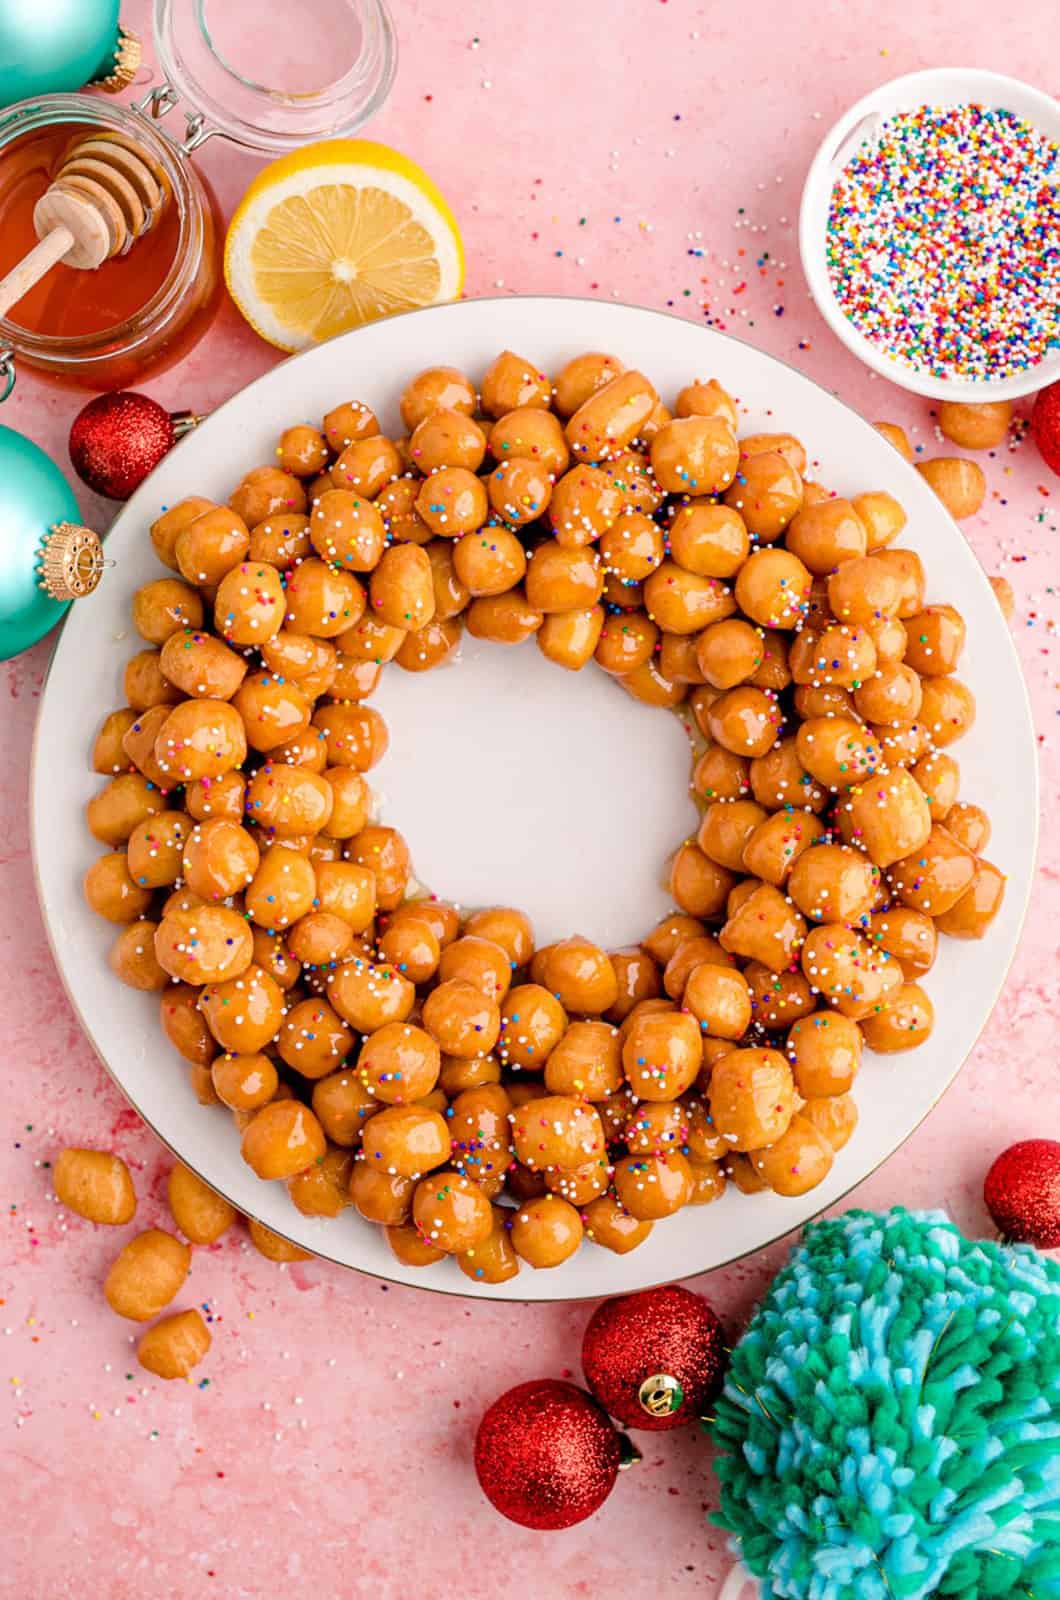 Struffoli on platter with sprinkles in a wreath circle shape.